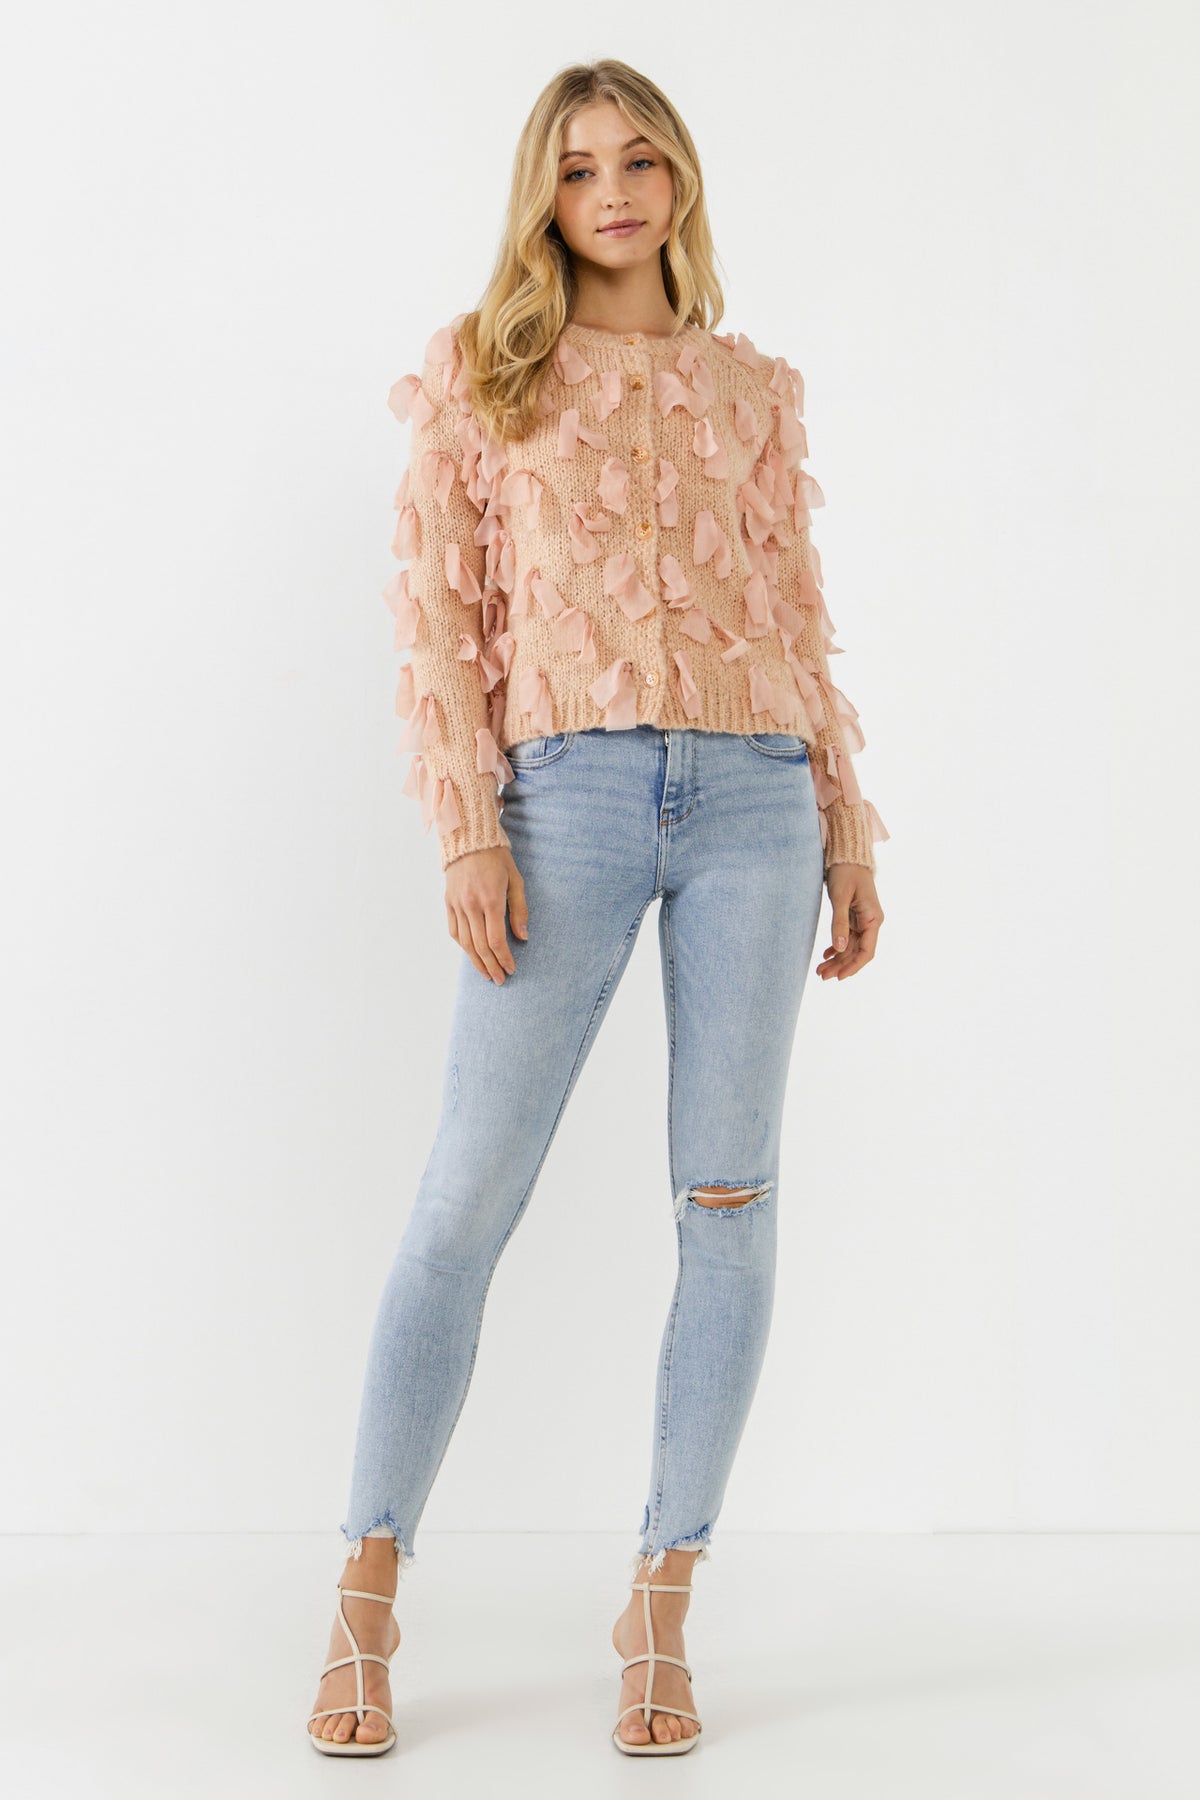 FREE THE ROSES - Ribbon Detail Cardigan - SWEATERS & KNITS available at Objectrare